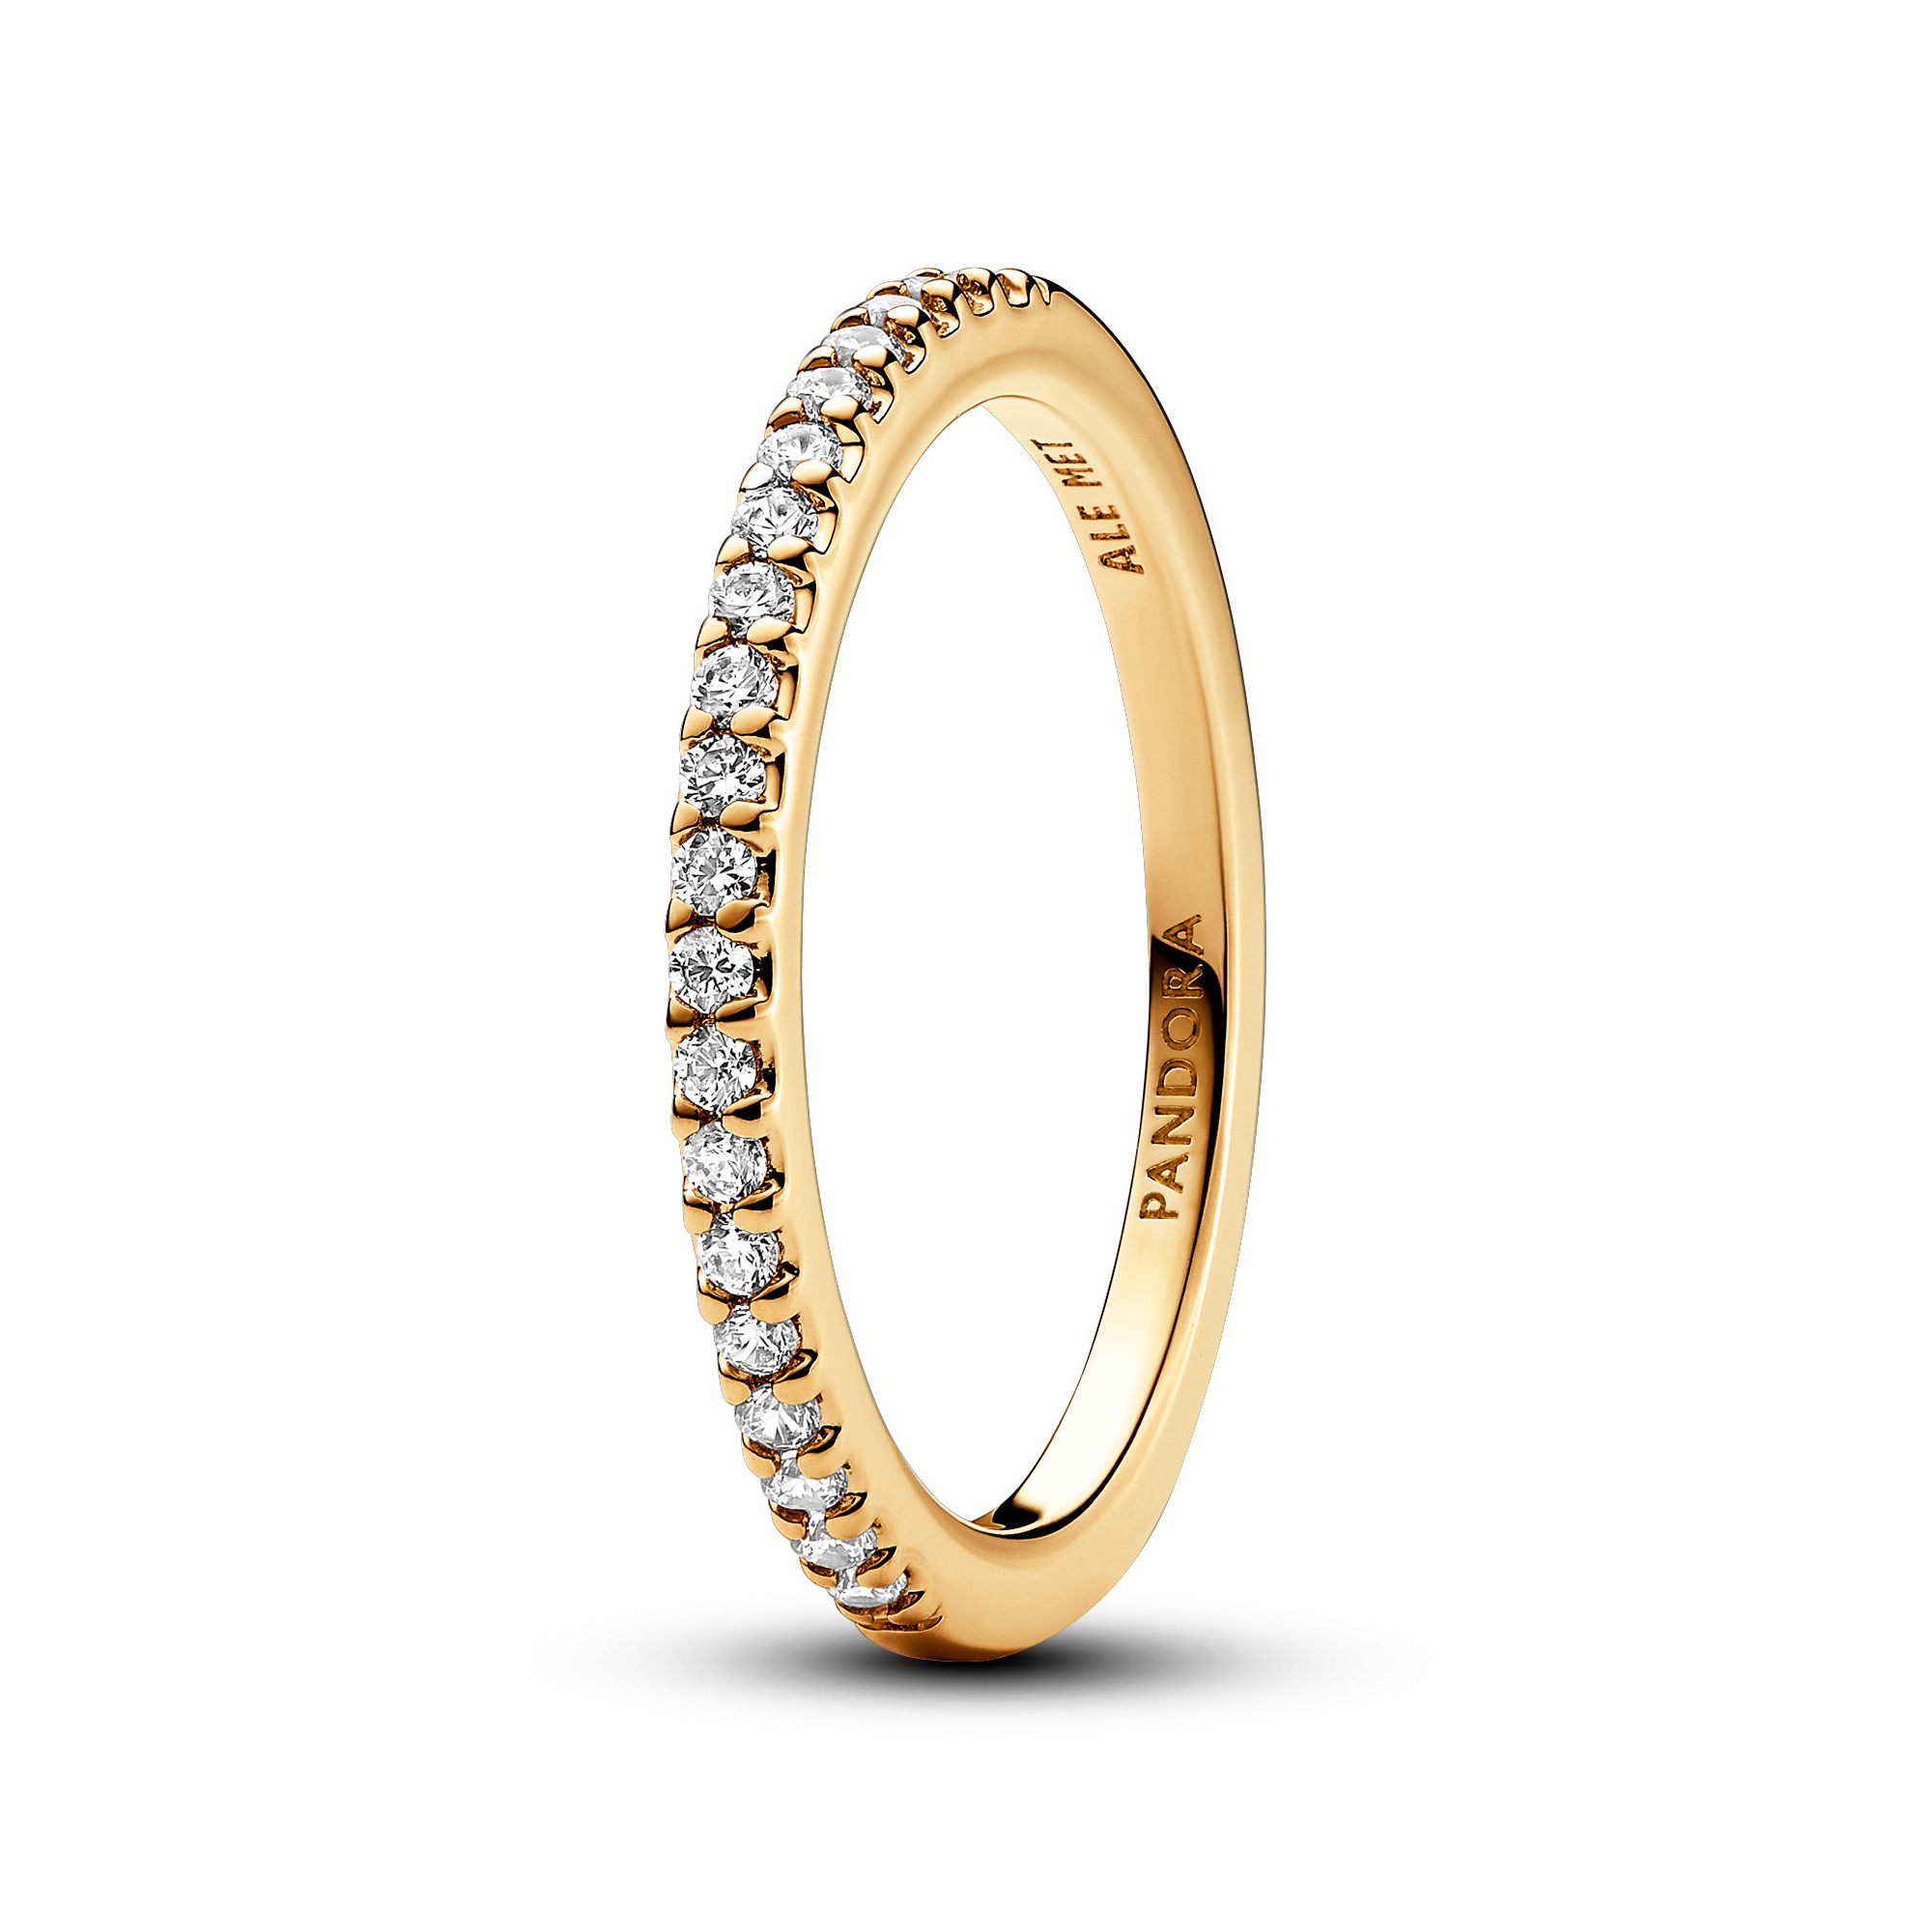 Pandora Sparkling Gold-Plated Band Ring - Size 7